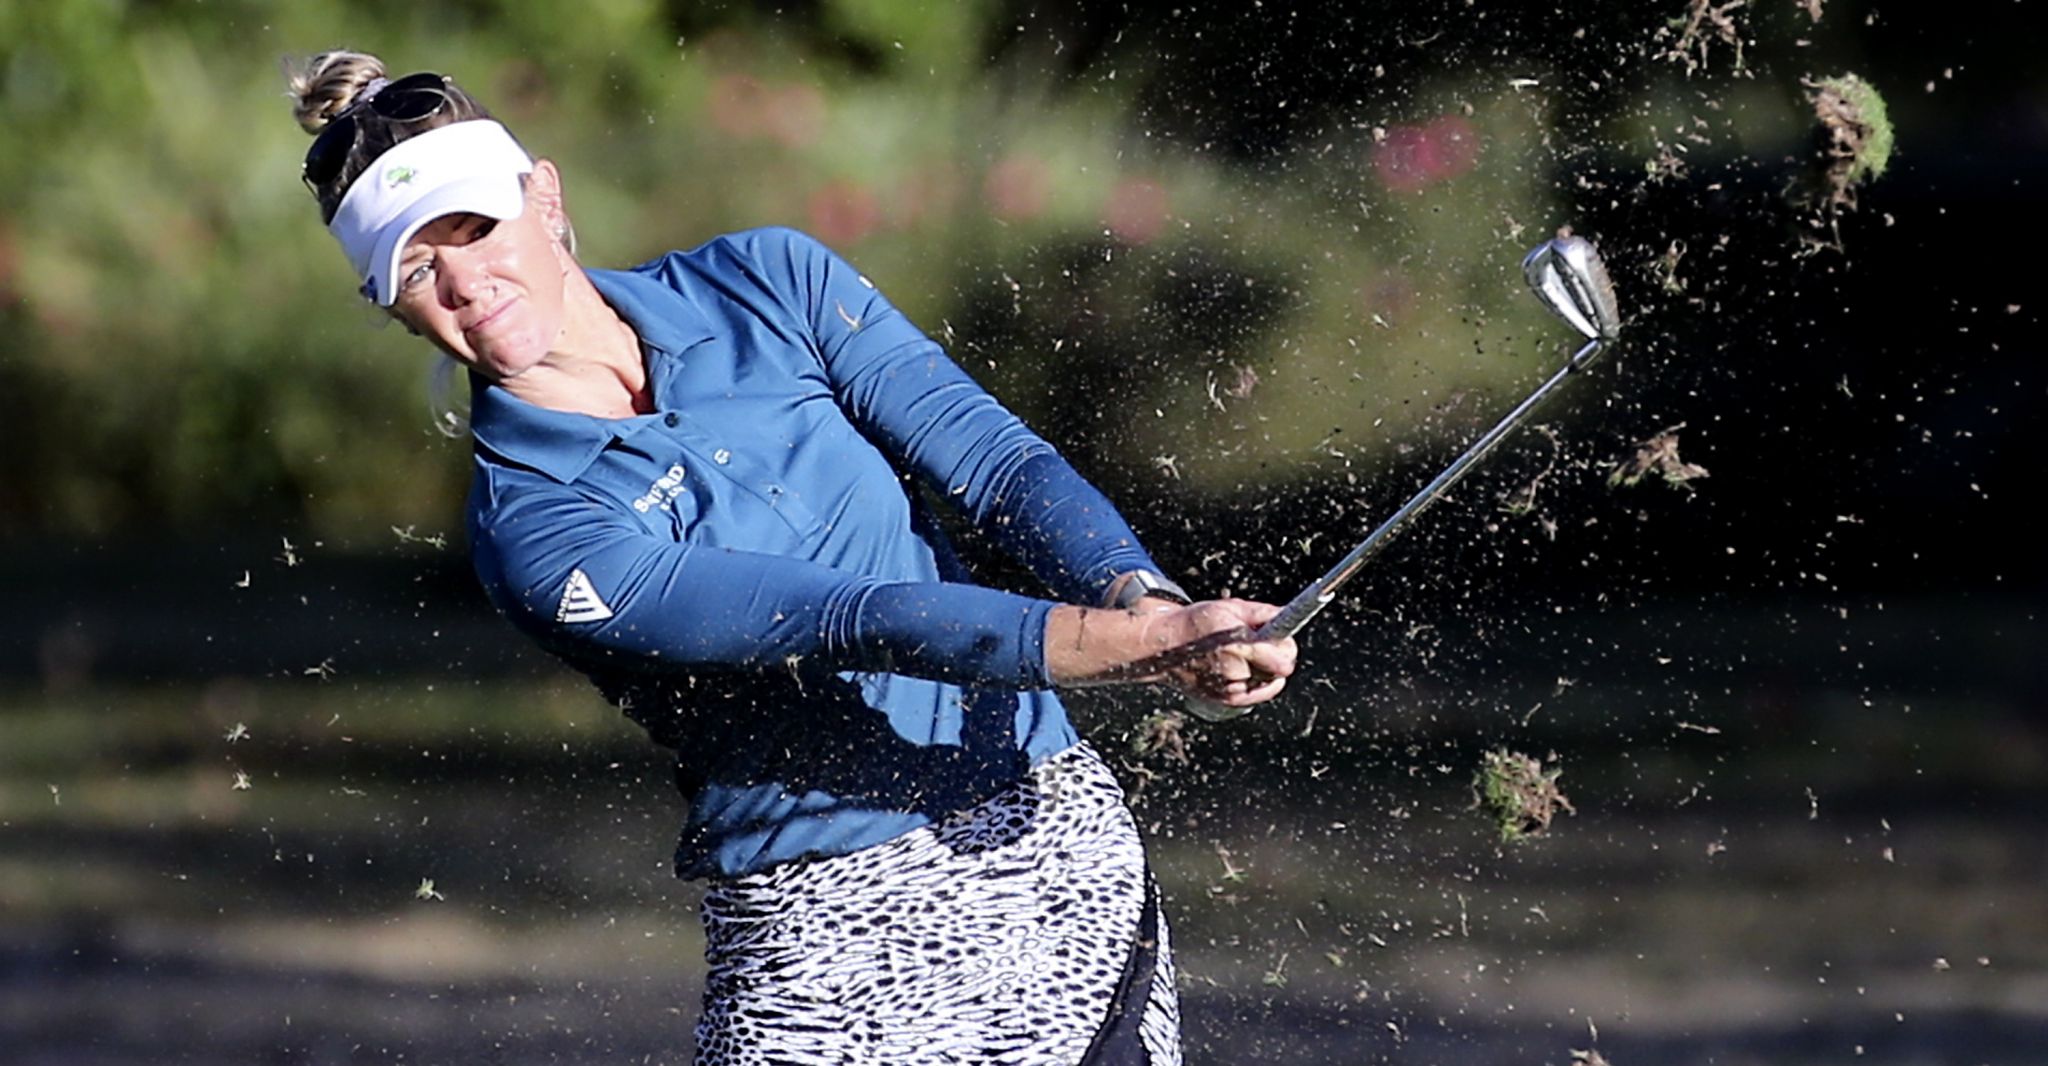 With an ace in the hole, Amy Olson takes firstround lead at U.S. Women